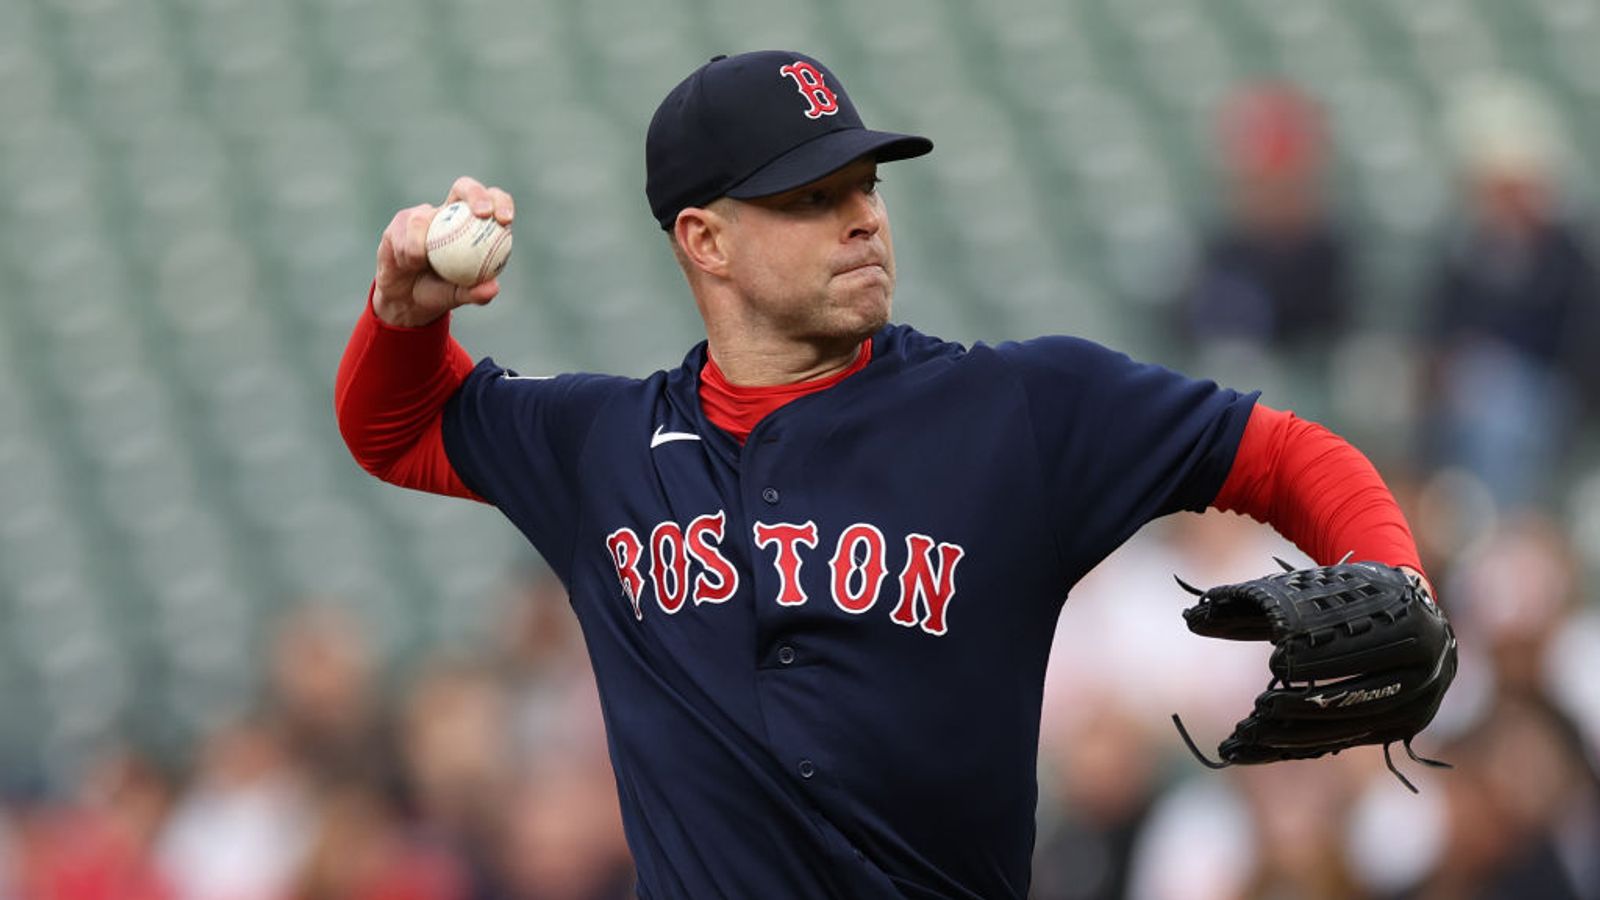 BSJ Game Report: Red Sox 8, Orioles 6 -- Kluber rebounds with